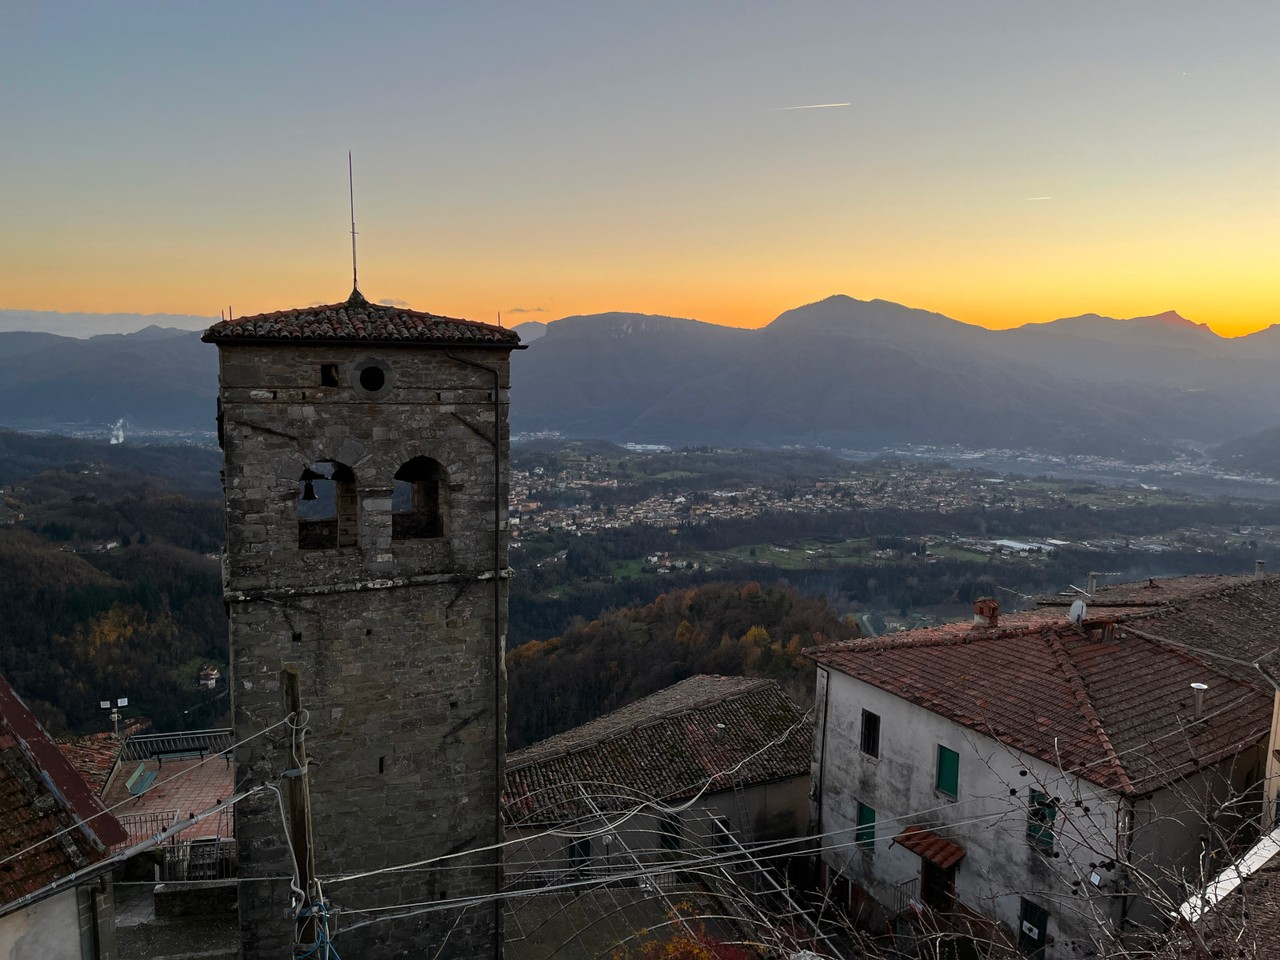 WWII in the Serchio Valley and Garfagnana